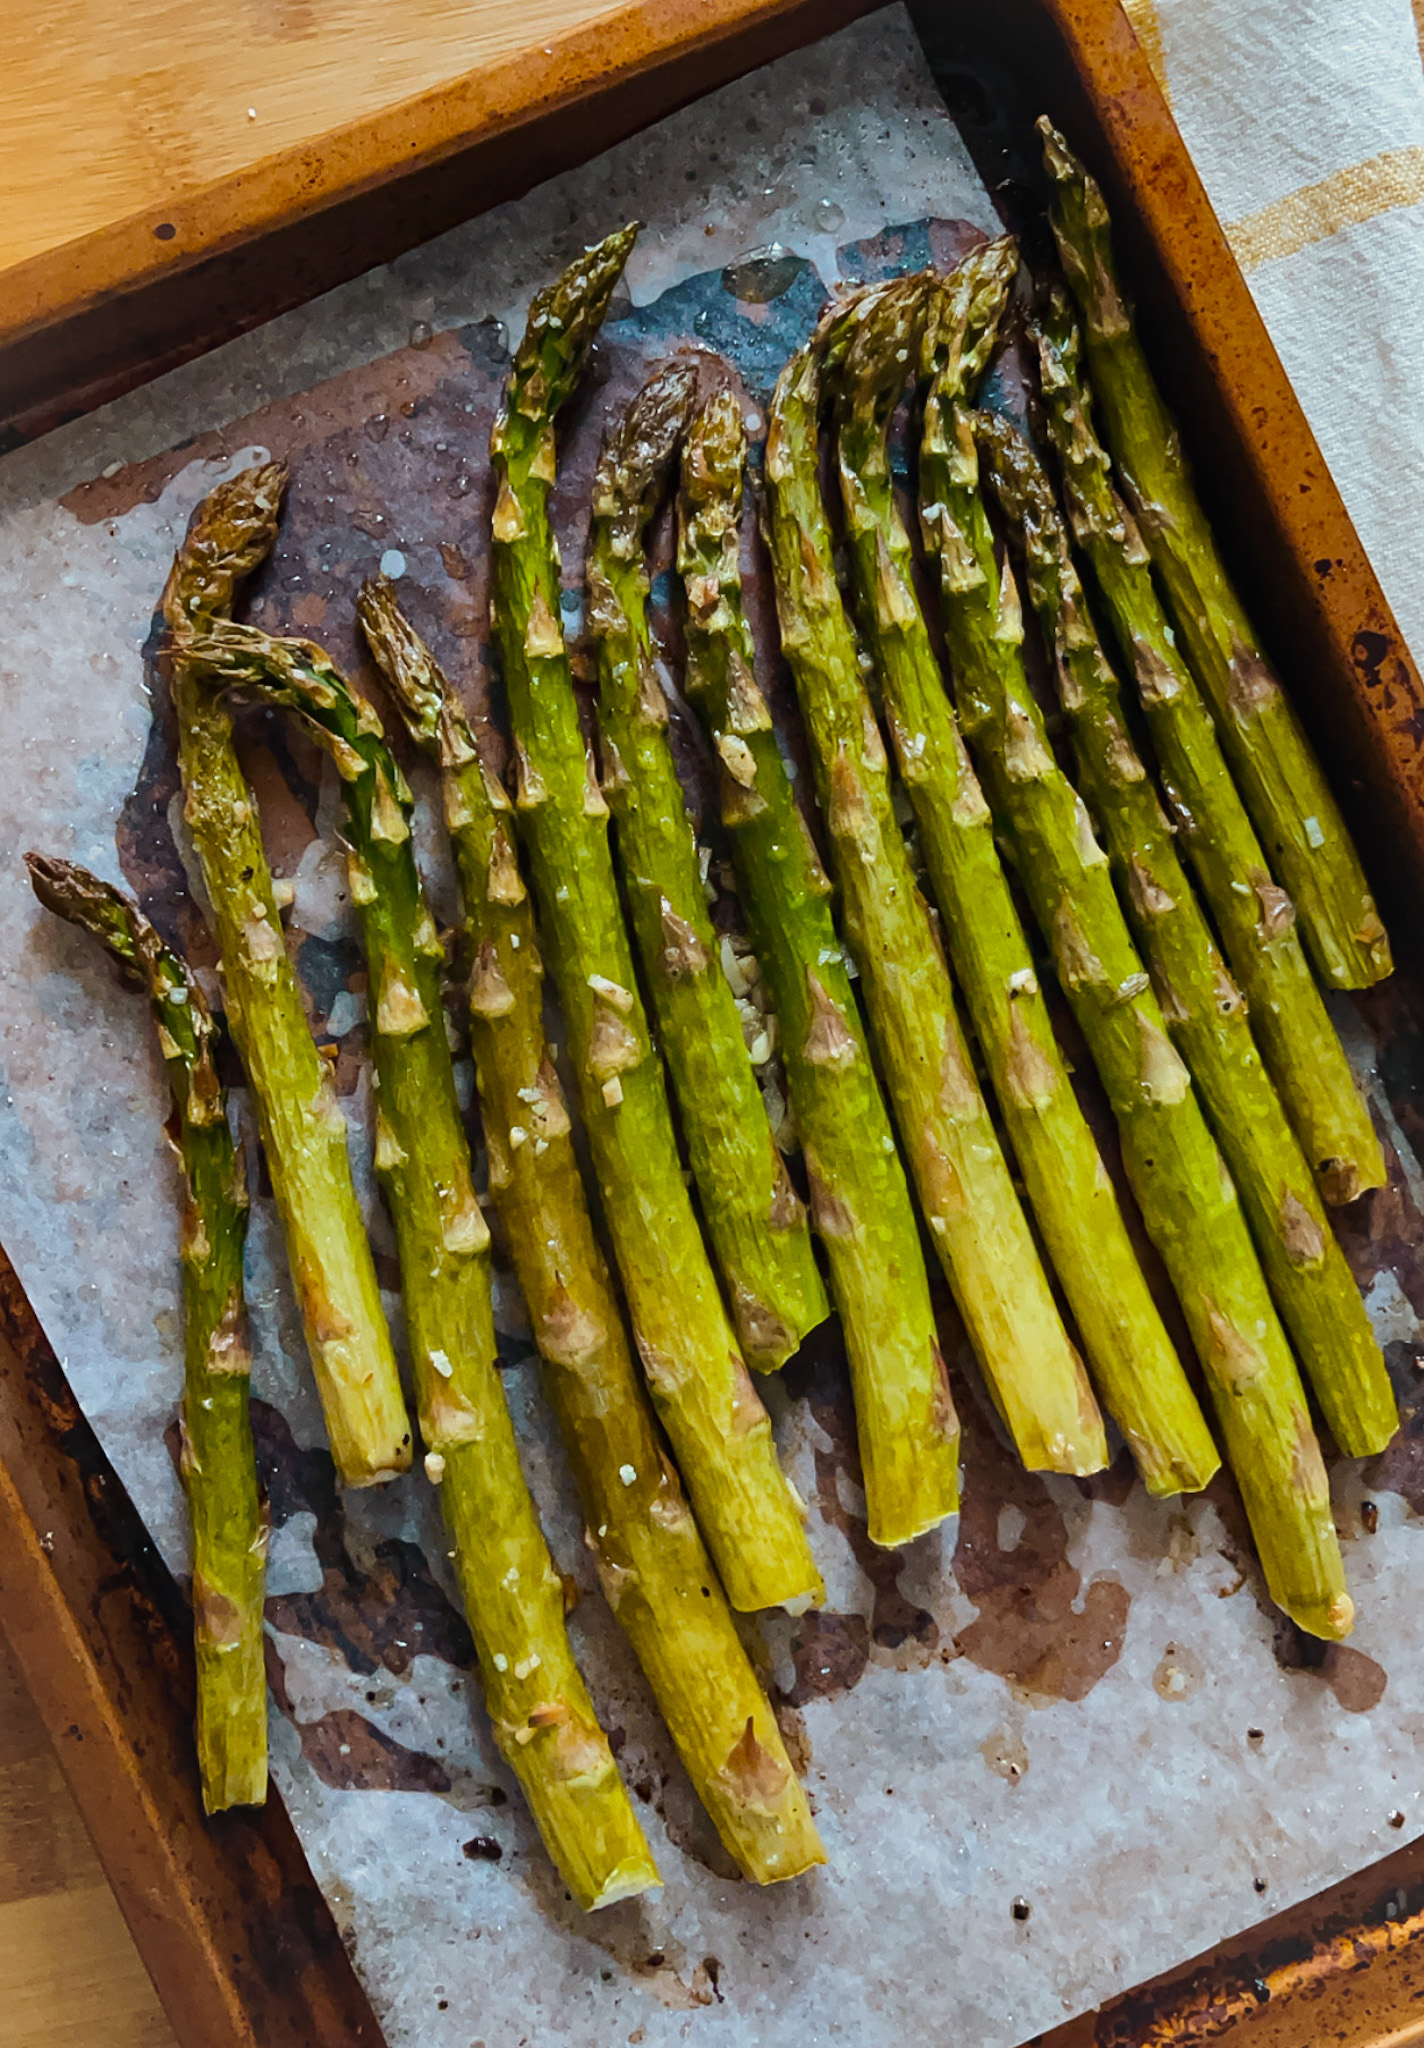 completed roasted garlic asparagus recipe